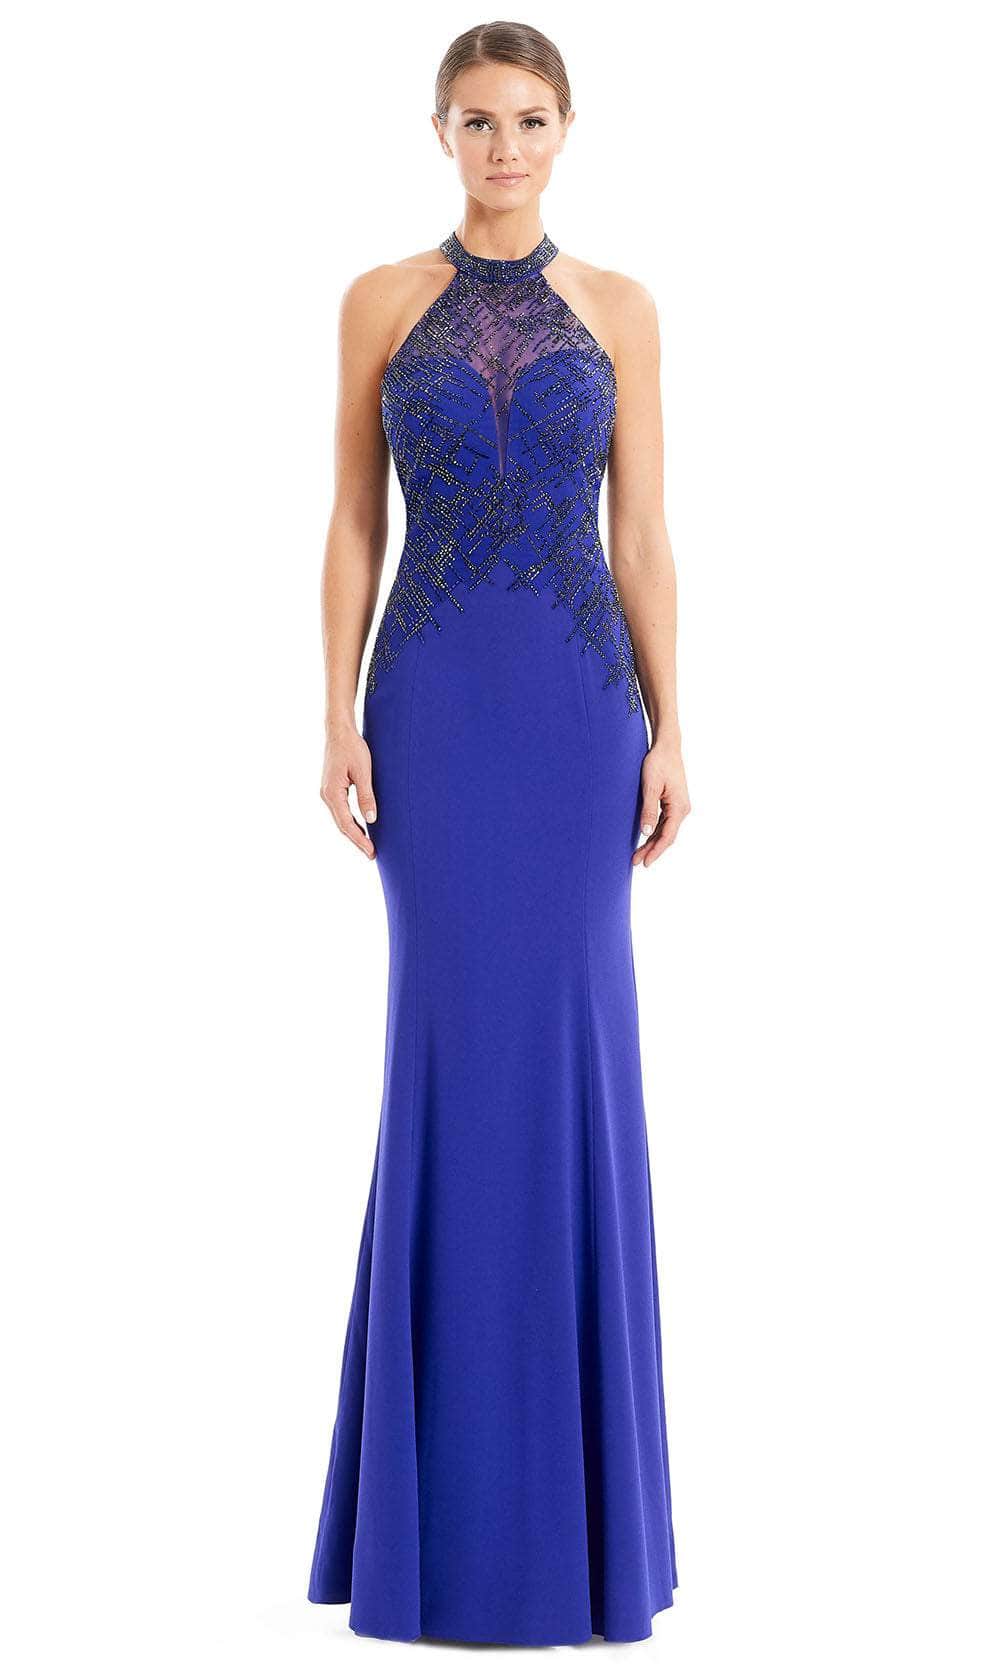 Alexander By Daymor 1672F22 - Illusion Halter Evening Dress Special Occasion Dress 4 / Sapphire